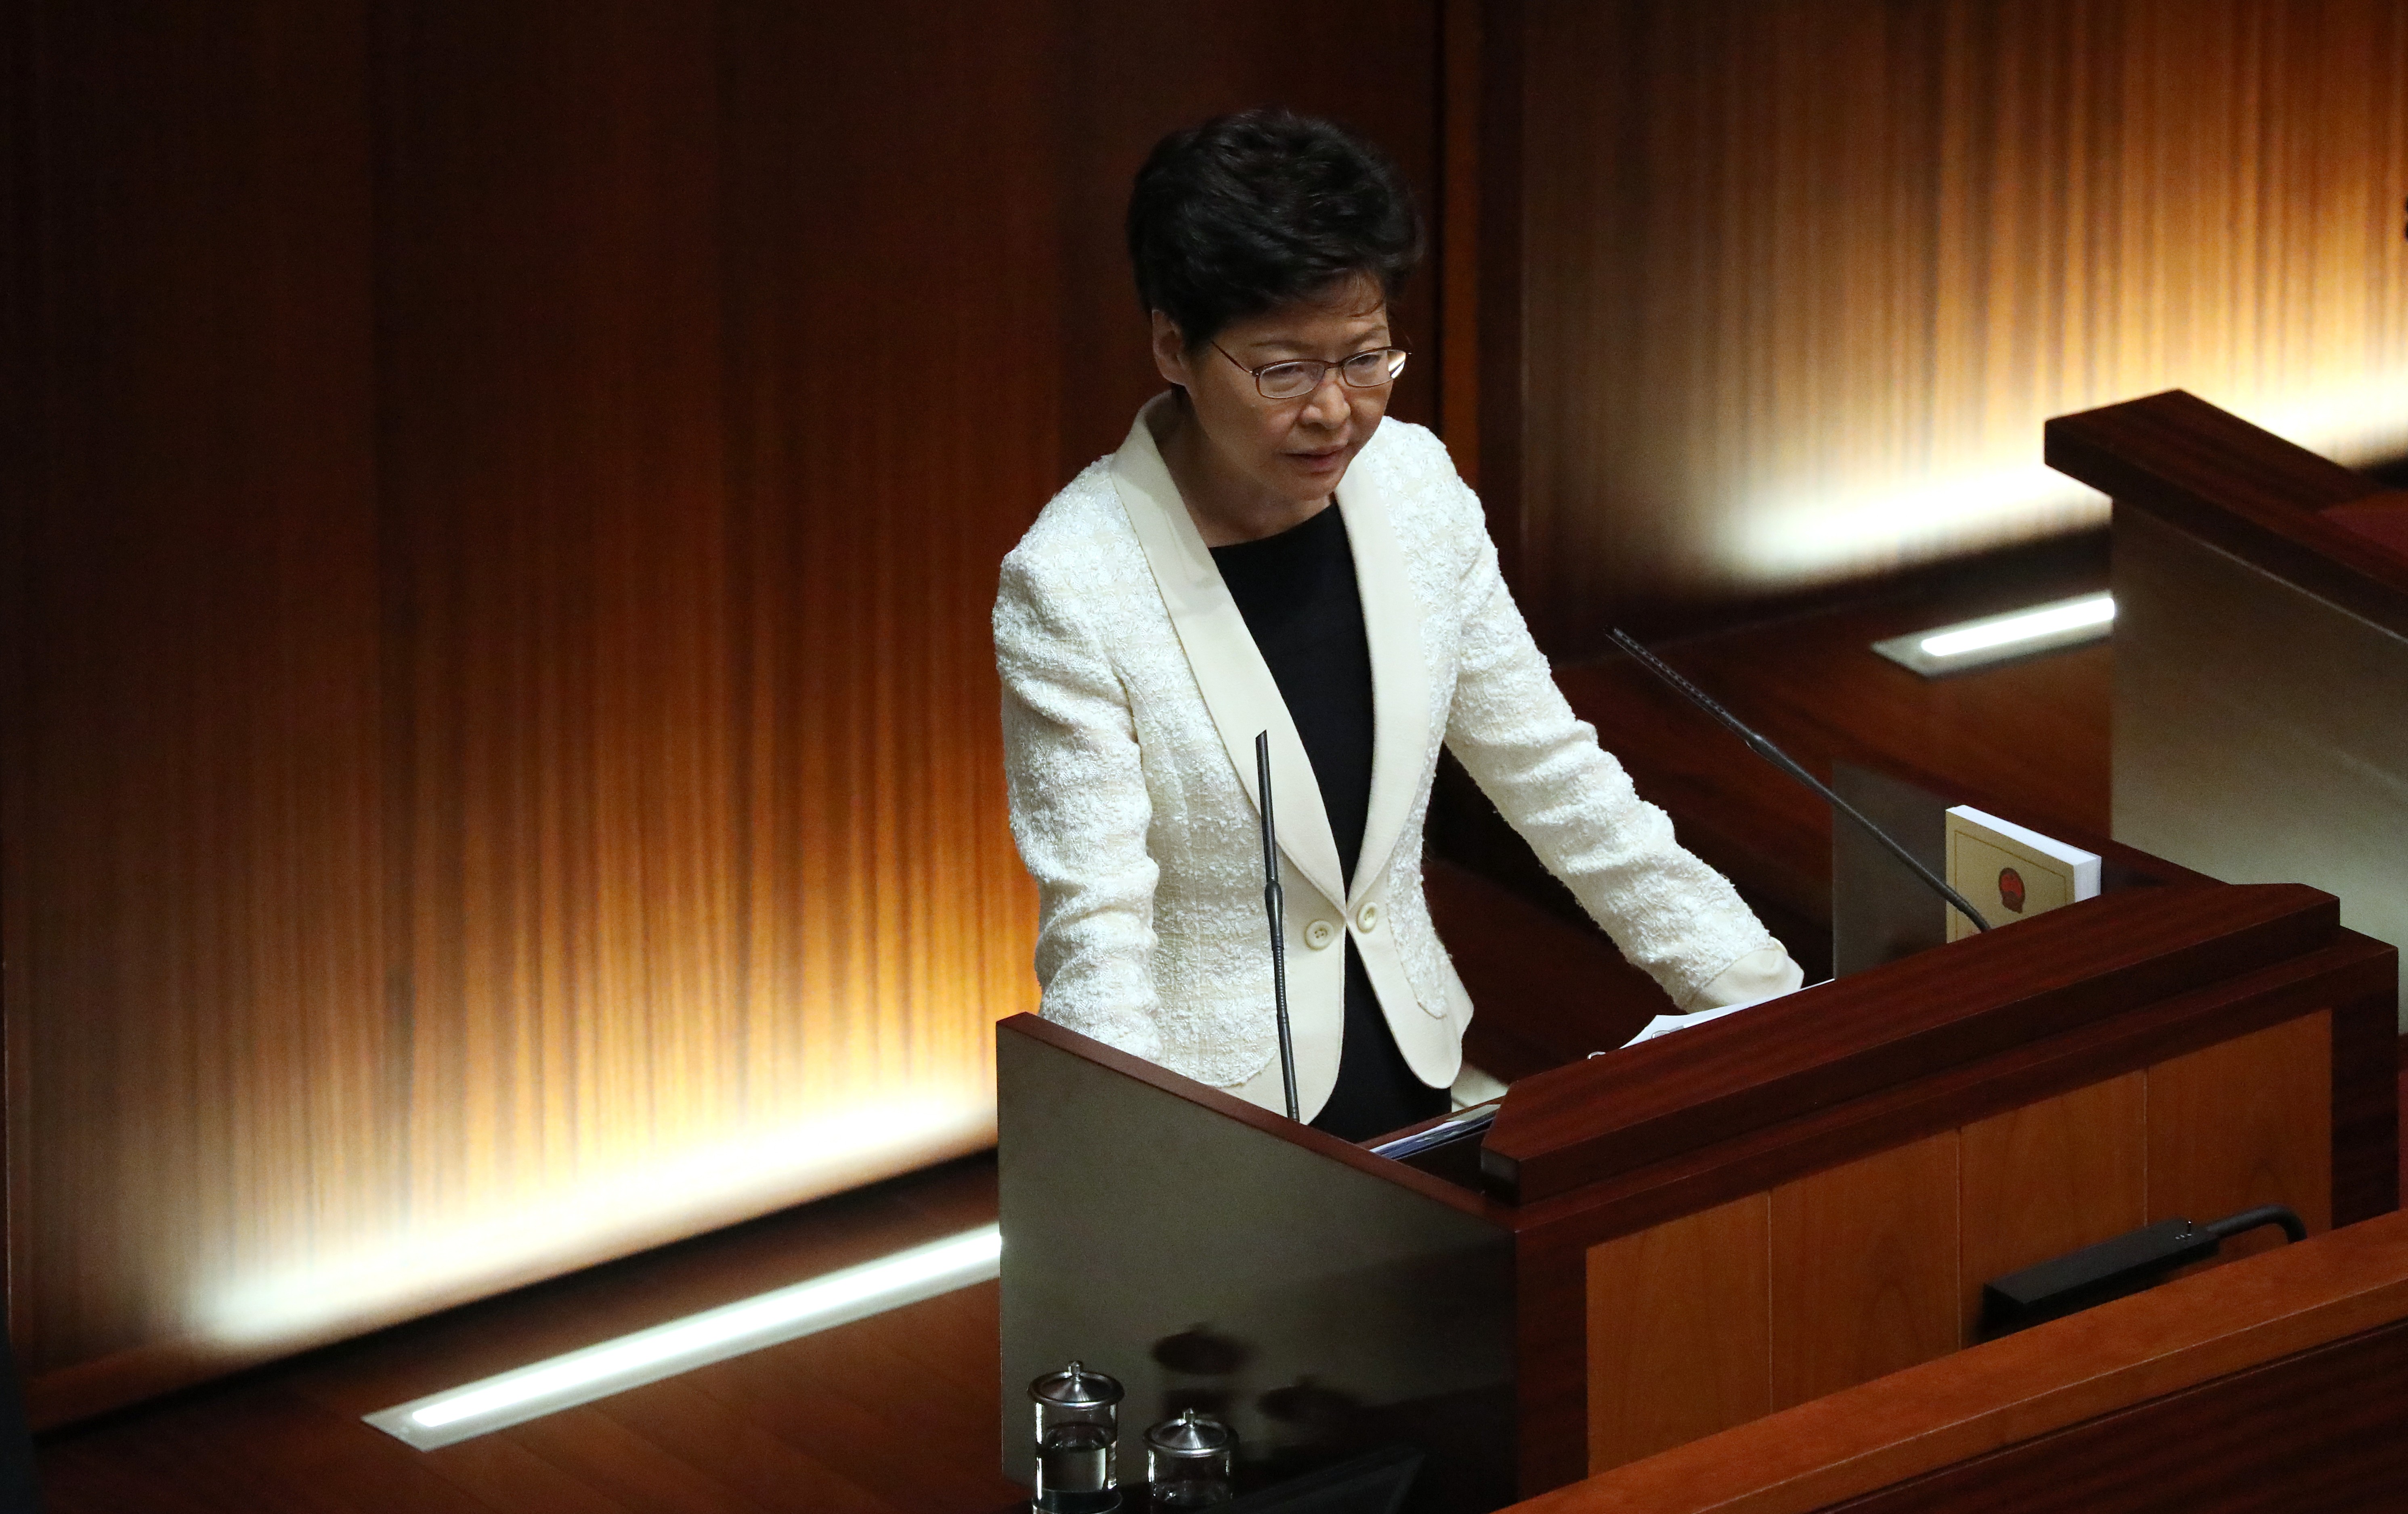 Chief Executive Carrie Lam during a question-and-answer session at the Legislative Council Complex on Thursday, a day after delivering the 2019 policy address. Photo: Nora Tam